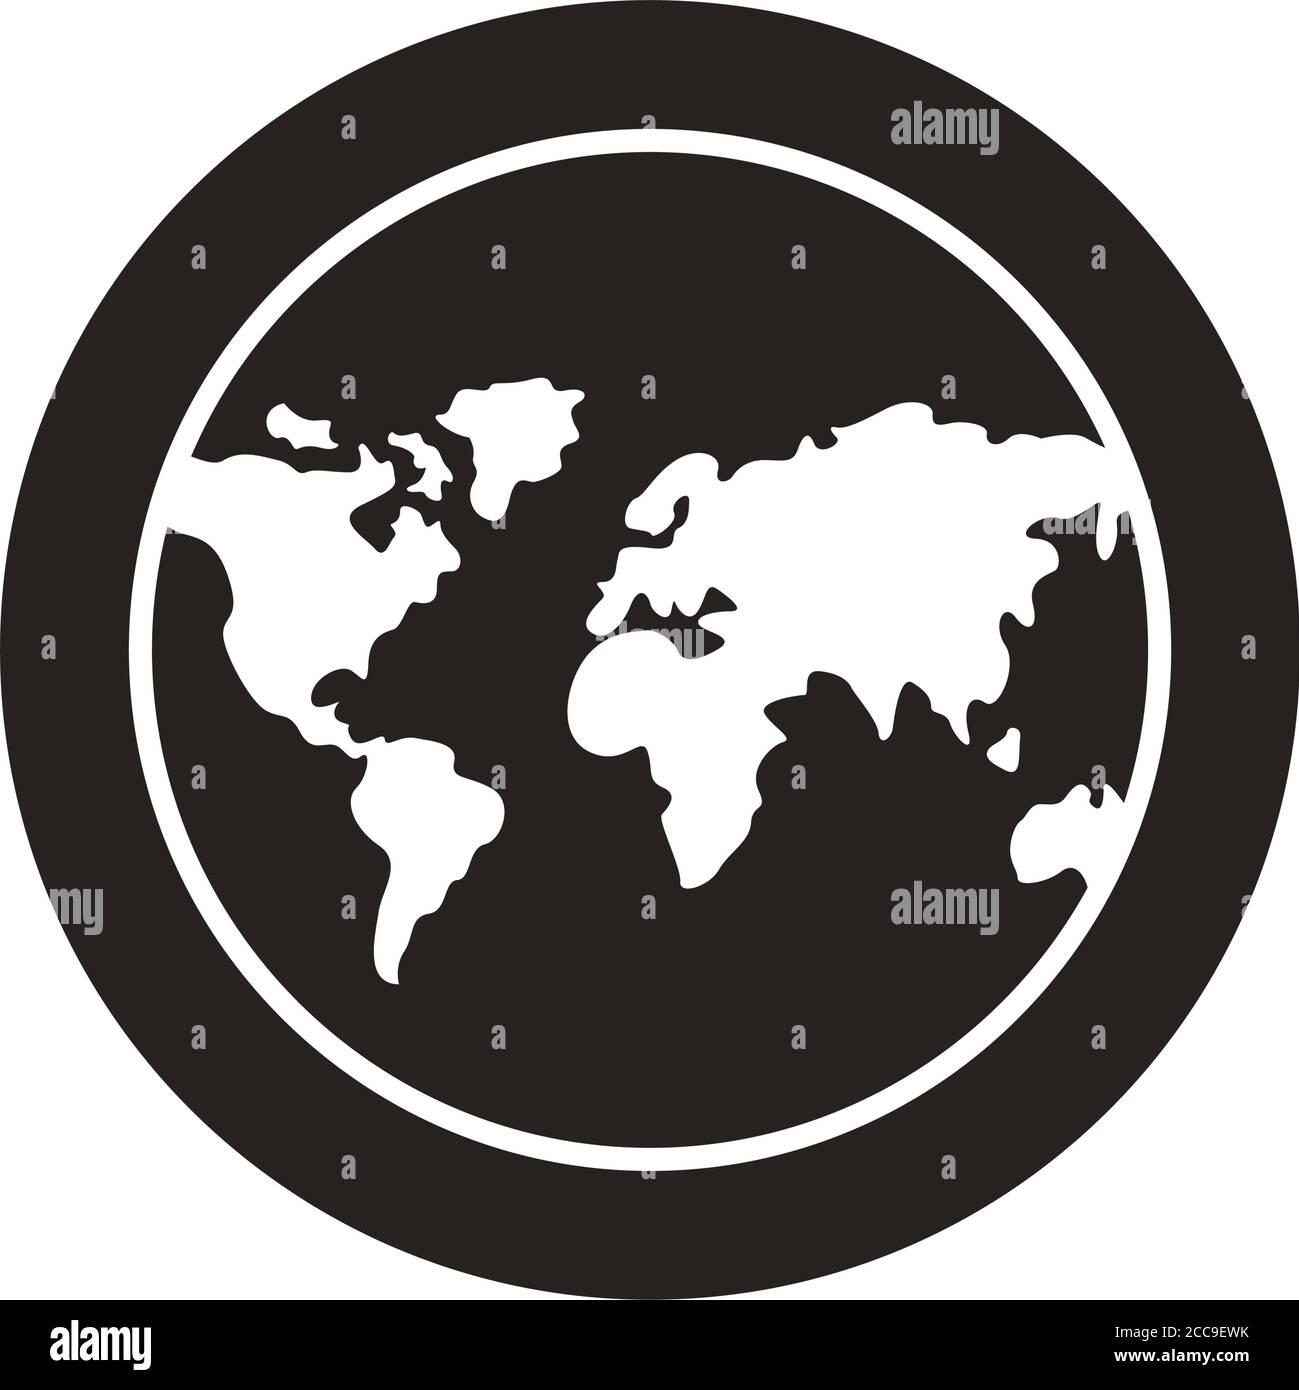 World Planet Earth With Continents Maps Block Style Icon Vector